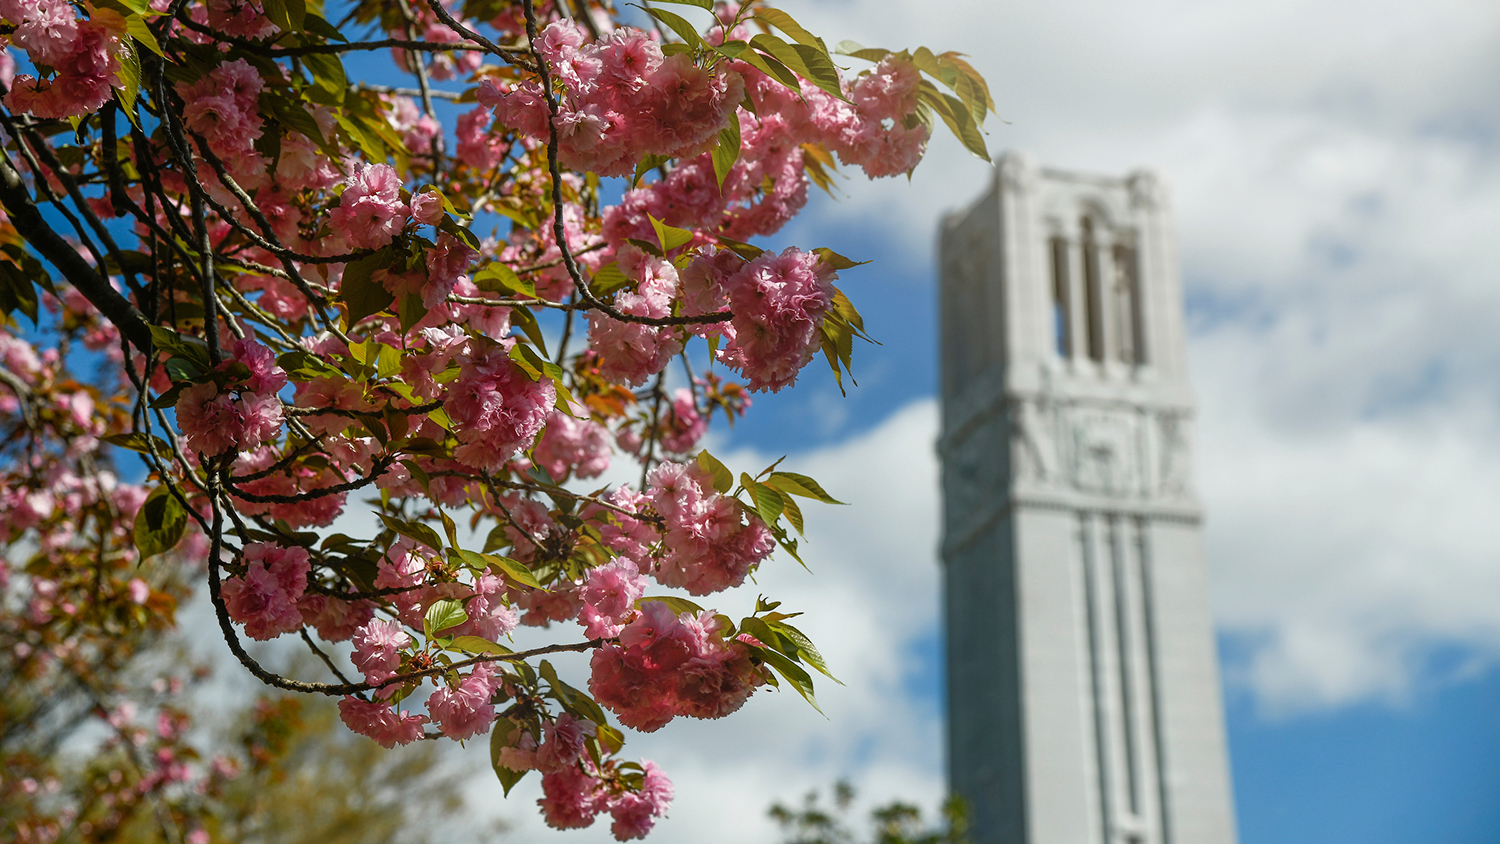 The Belltower framed by blooming trees in the spring. Photo by Marc Hall.